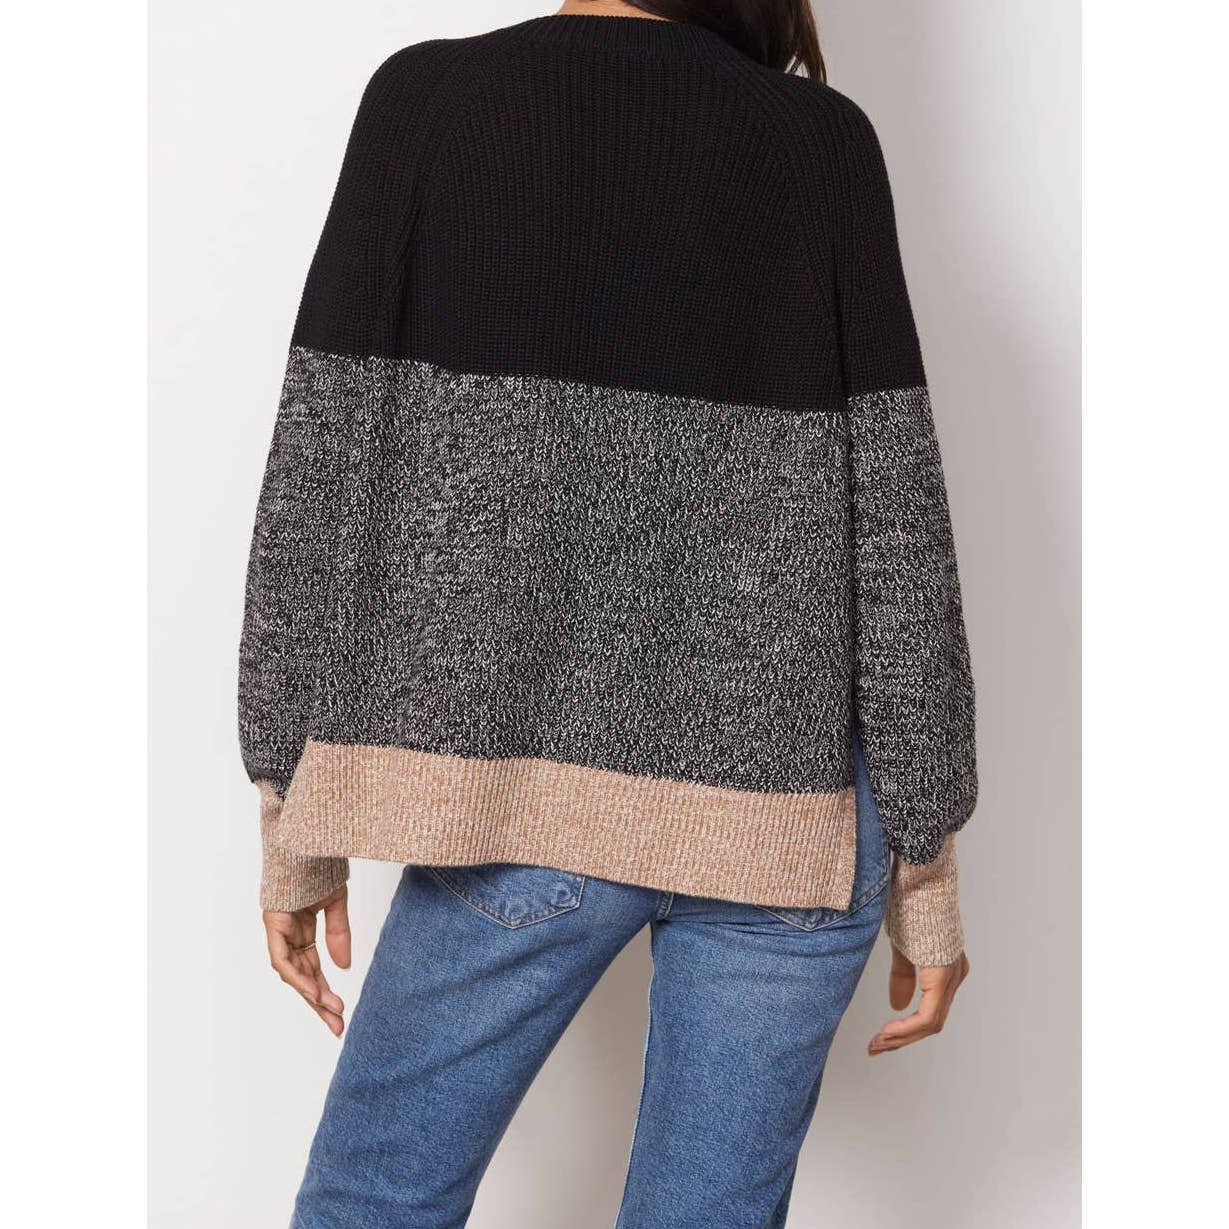 French Connection Lottie Colorblock Long Sleeve Pullover Sweater Black/Gray XS